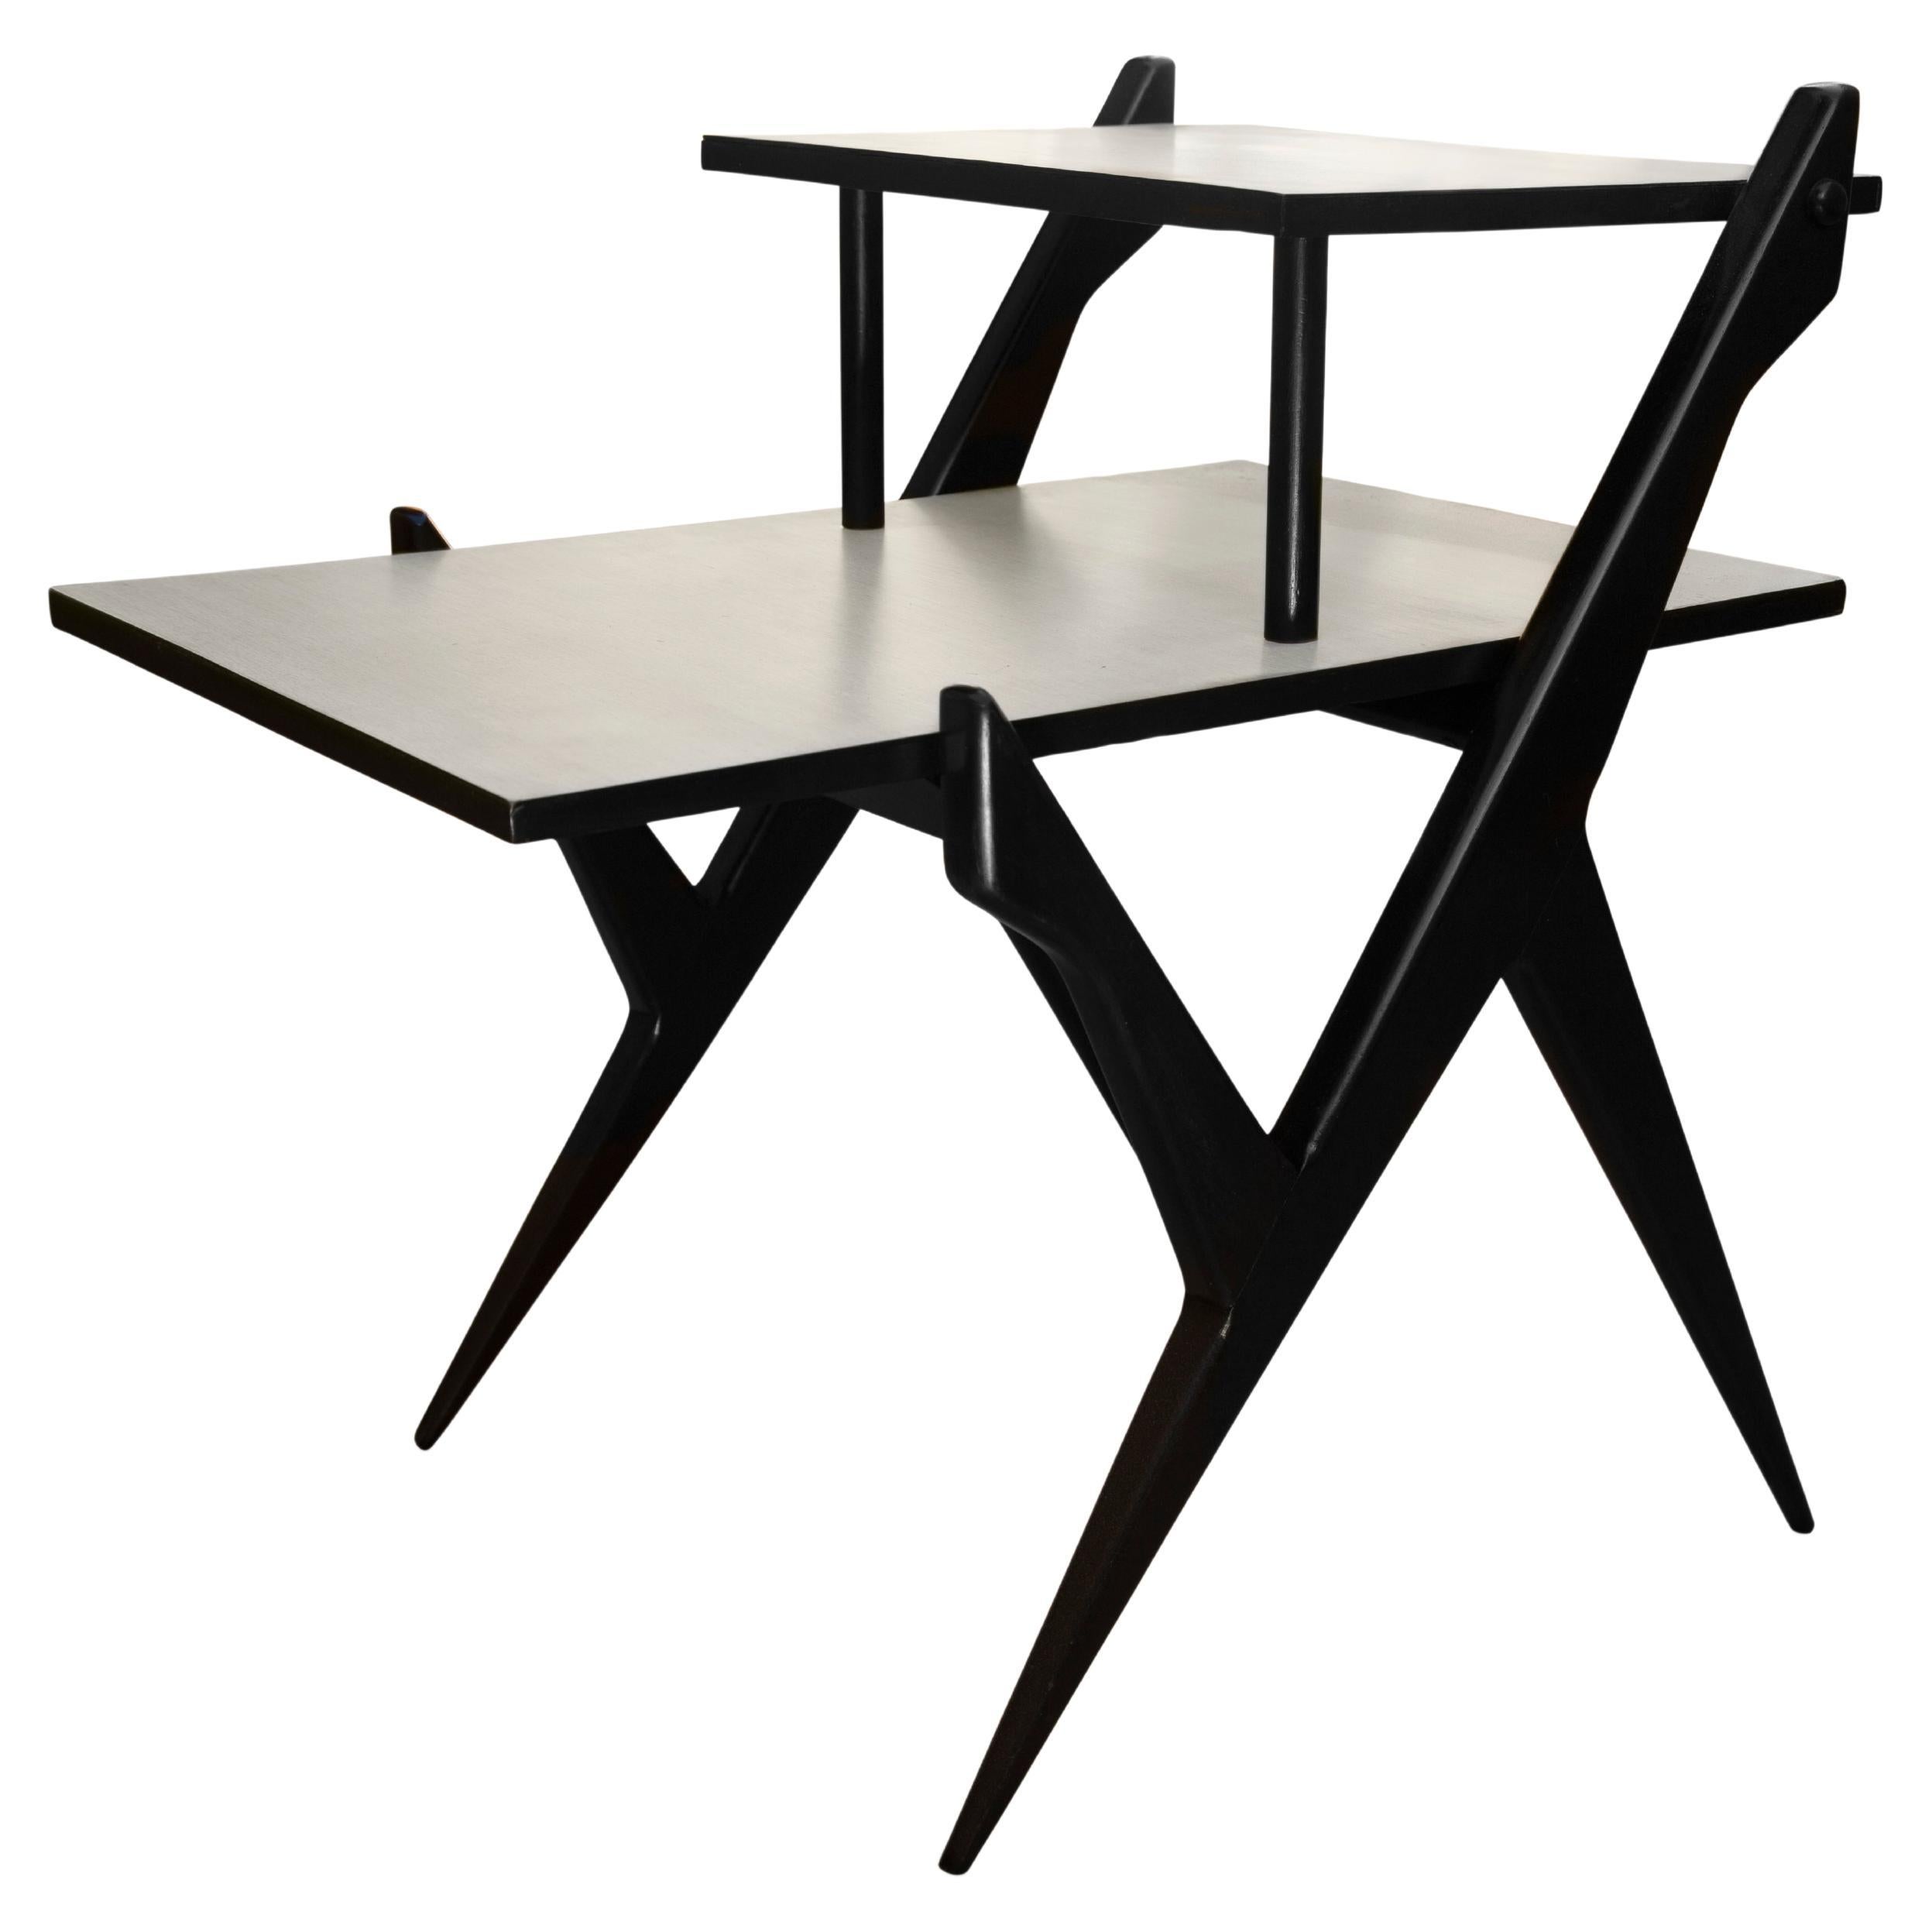 Mid-Century Modern Phone Table in Wood, Black & White, 1950s, Brazil For Sale